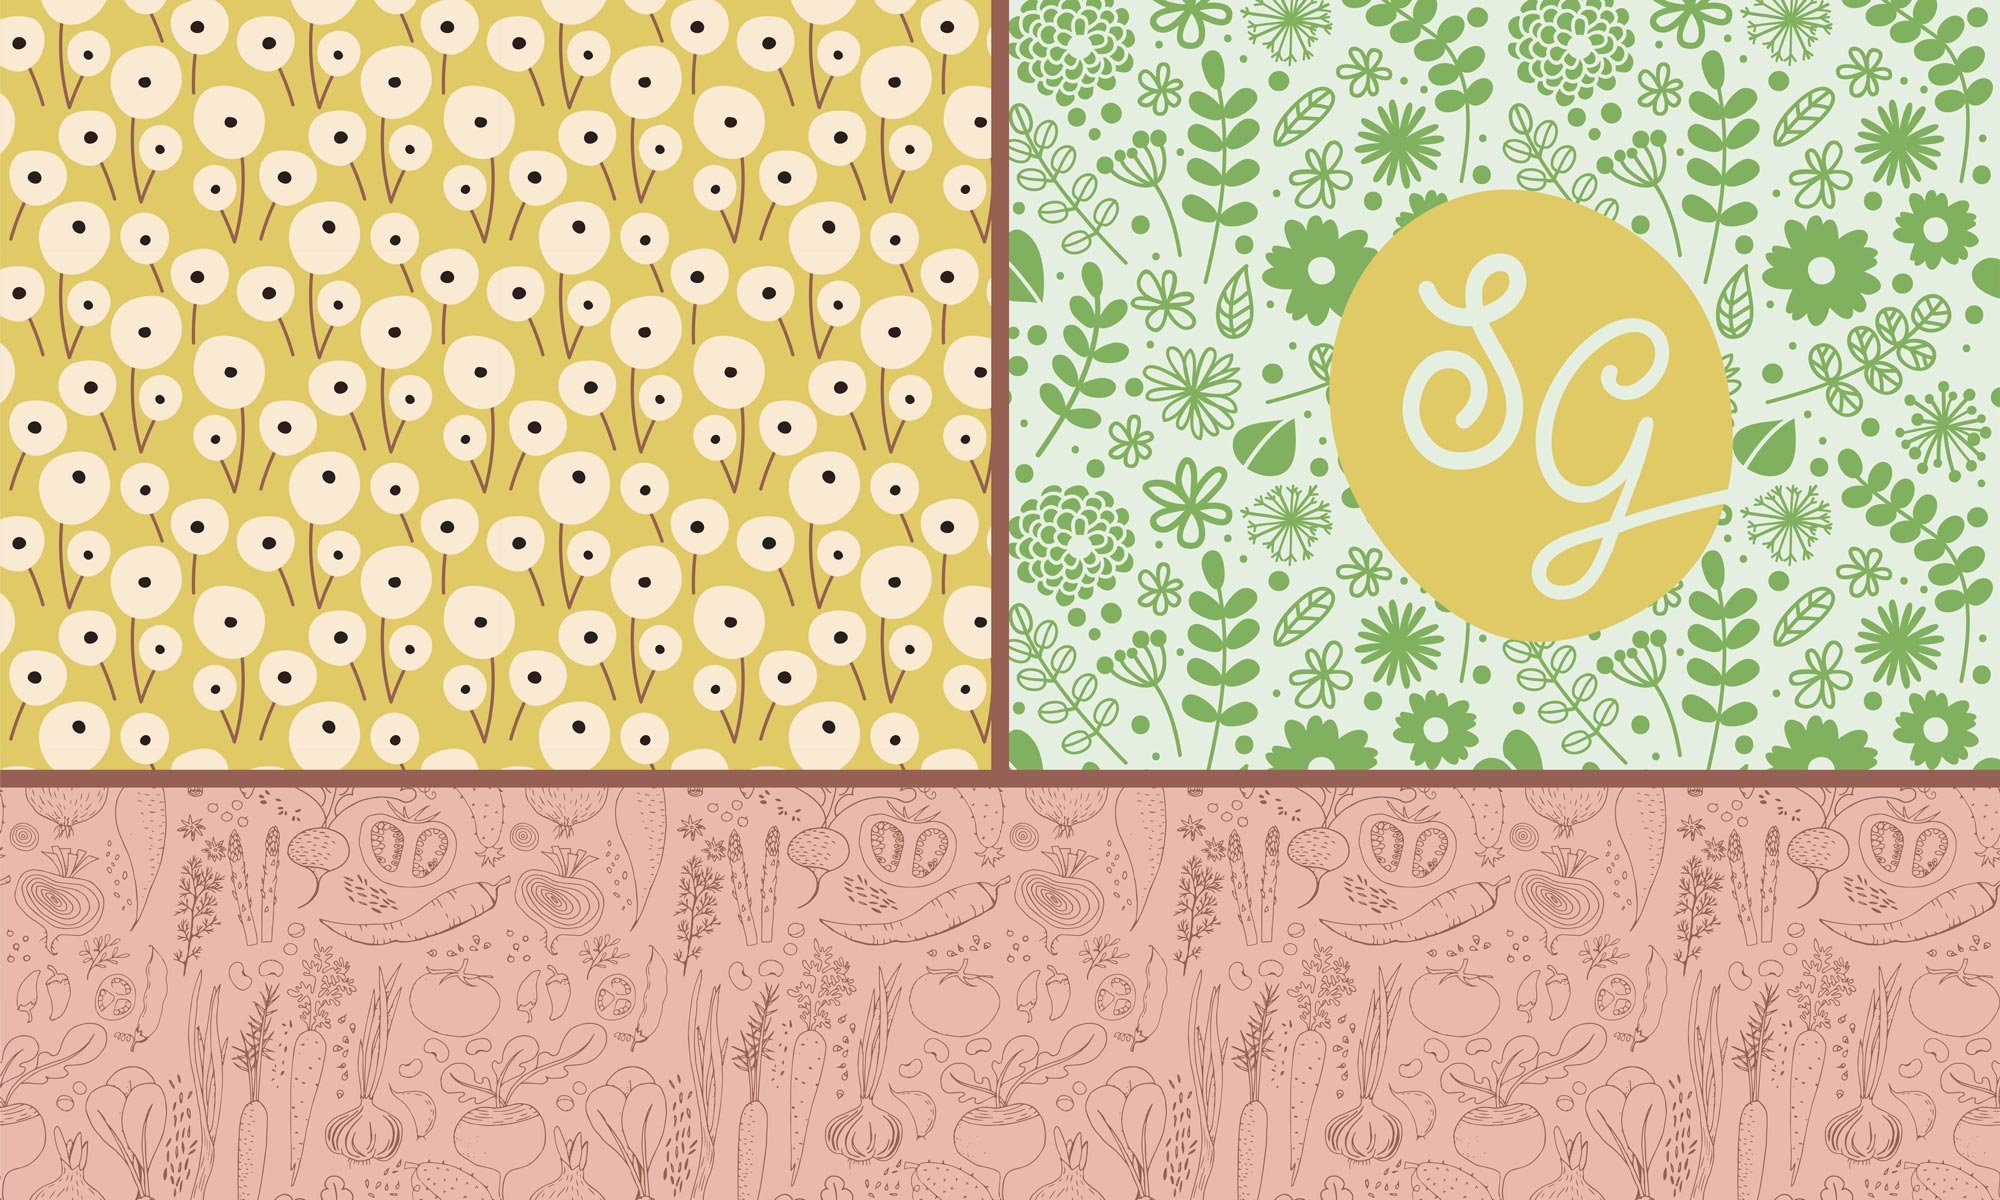  The Sage Garden branded patterns. Circles with blue dots on yellow background, dark green leaves and vegetation on light green background, and various vegetables on a pink background. 